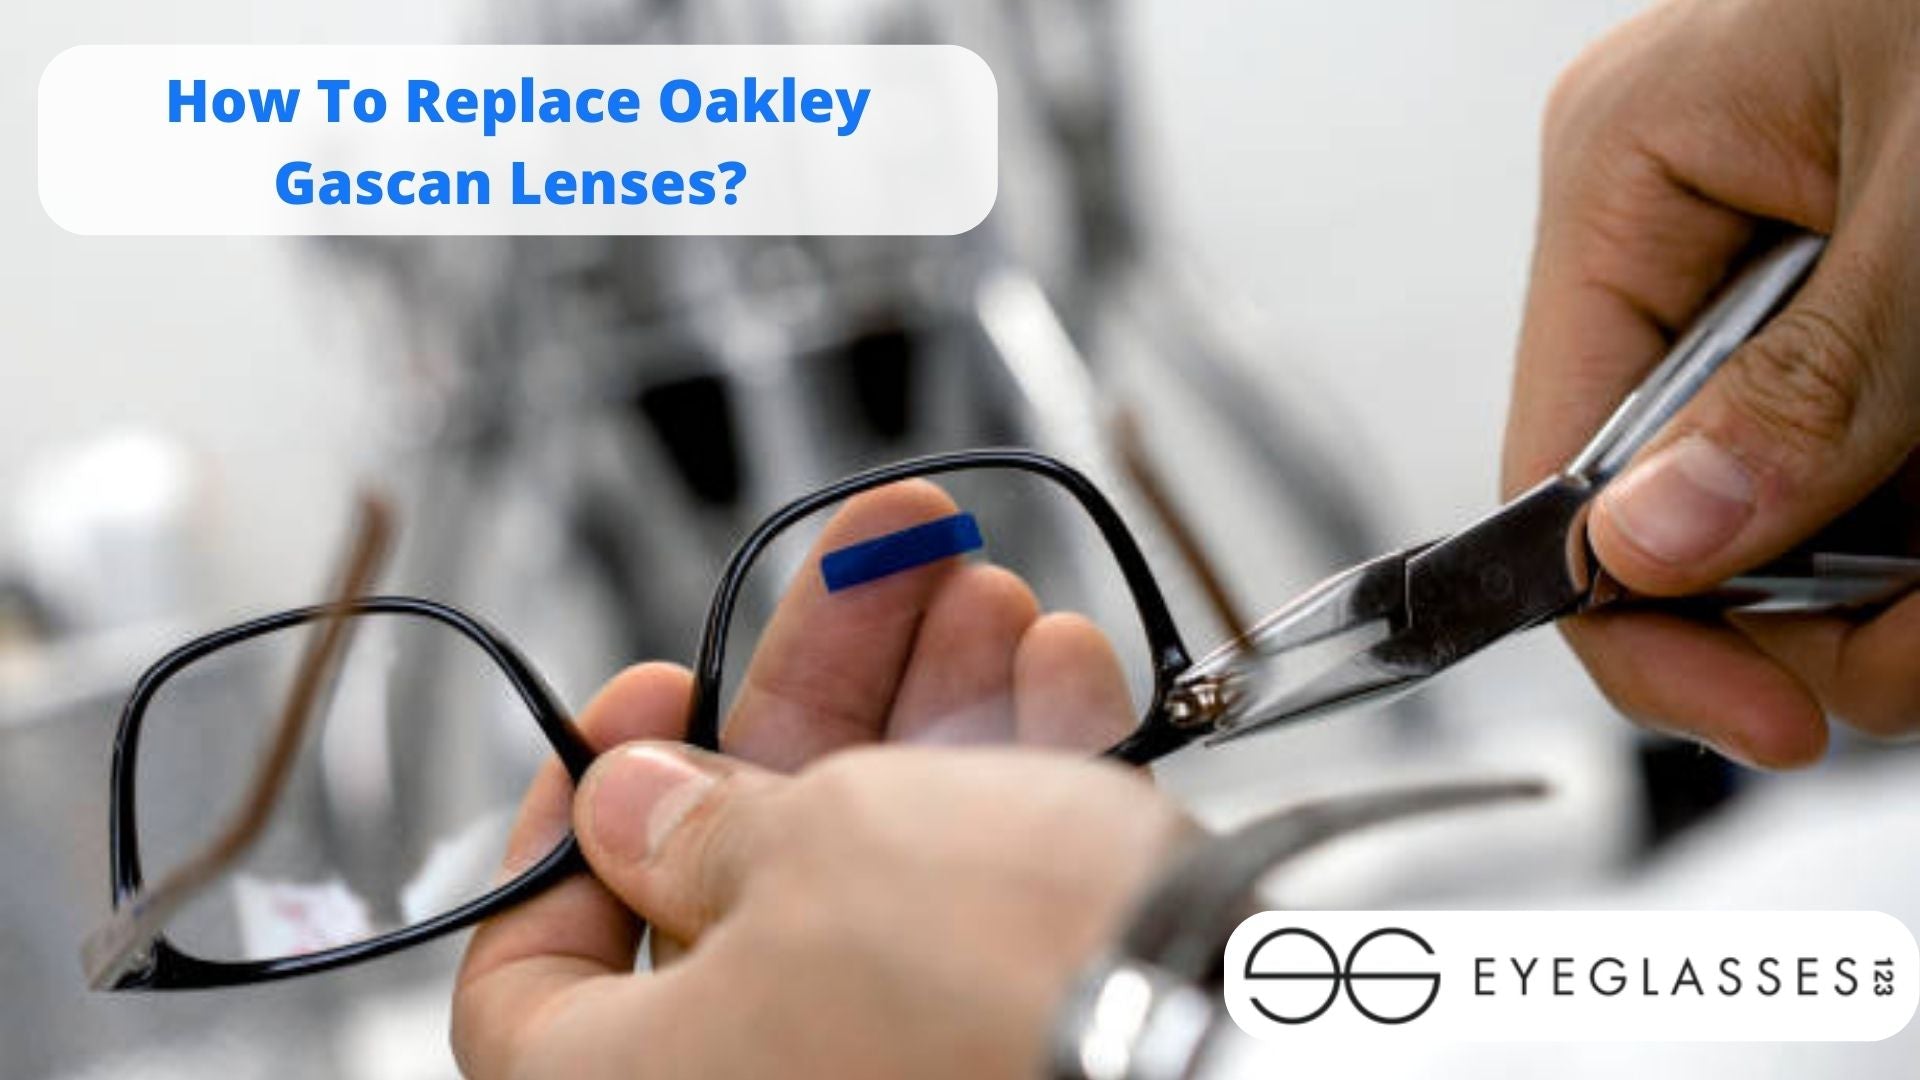 How To Replace Oakley Gascan Lenses?